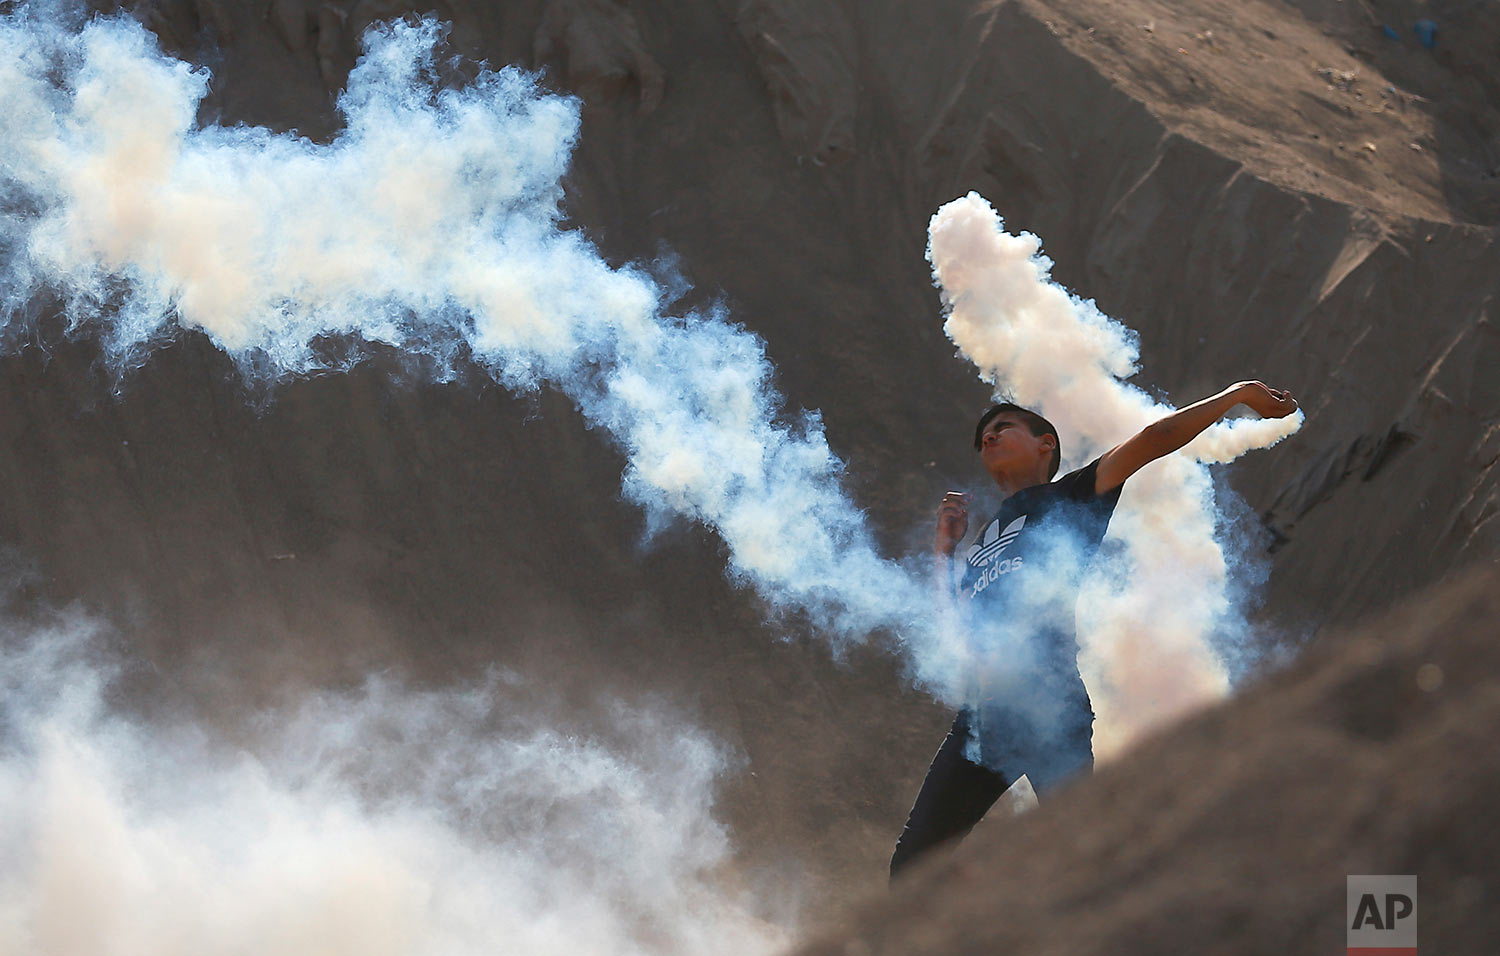 A Palestinian protester throws a teargas canister fired by Israeli soldiers back during clashes on the Israeli border with Gaza, Friday, July 21, 2017. (AP Photo/Khalil Hamra)